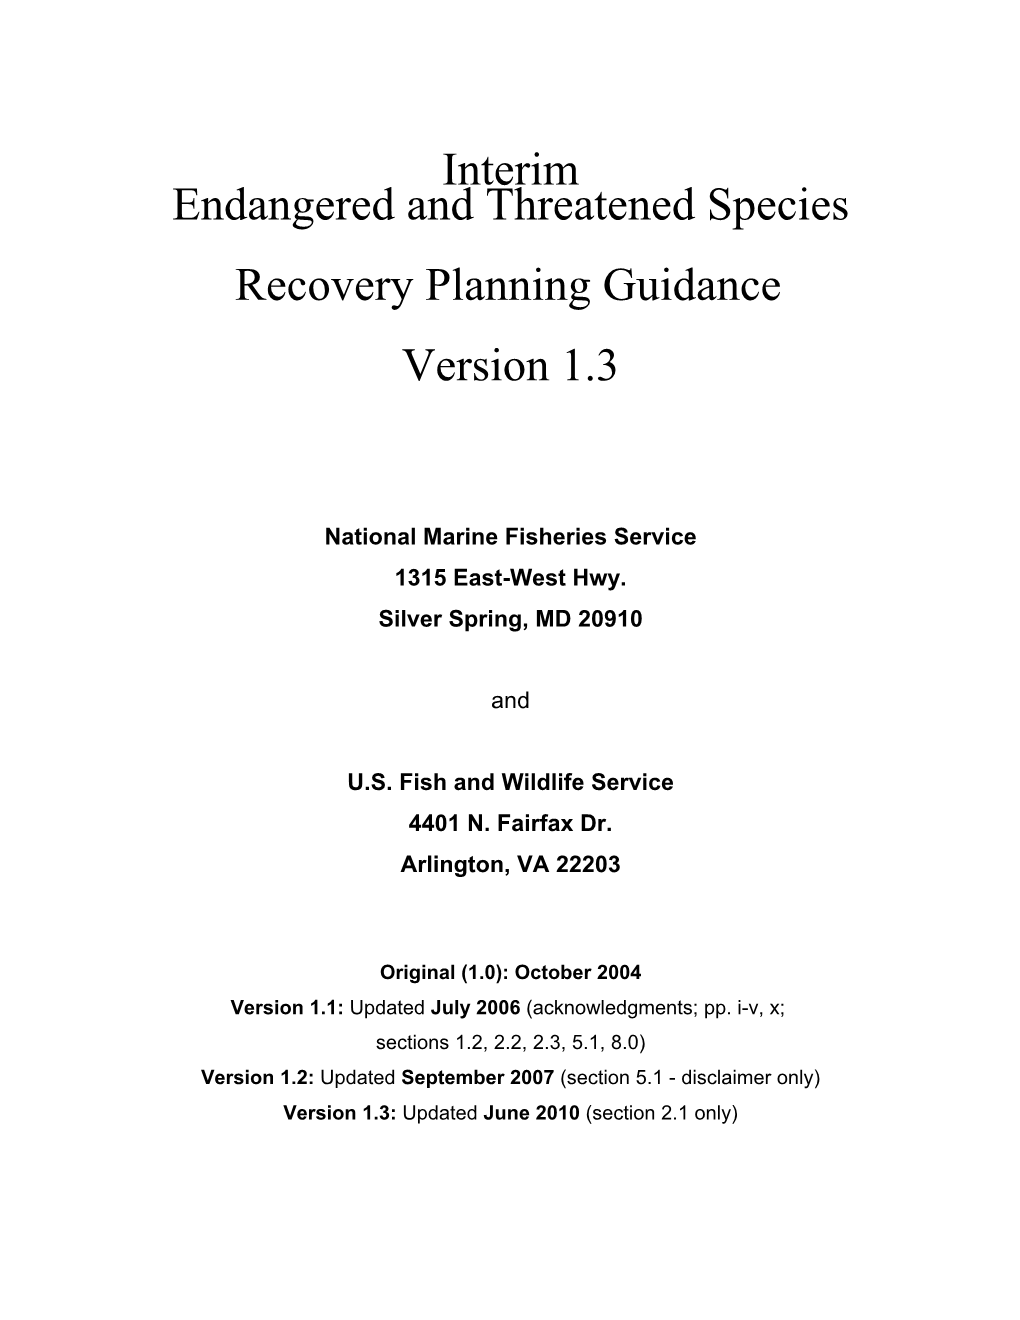 Interim Endangered and Threatened Species Recovery Planning